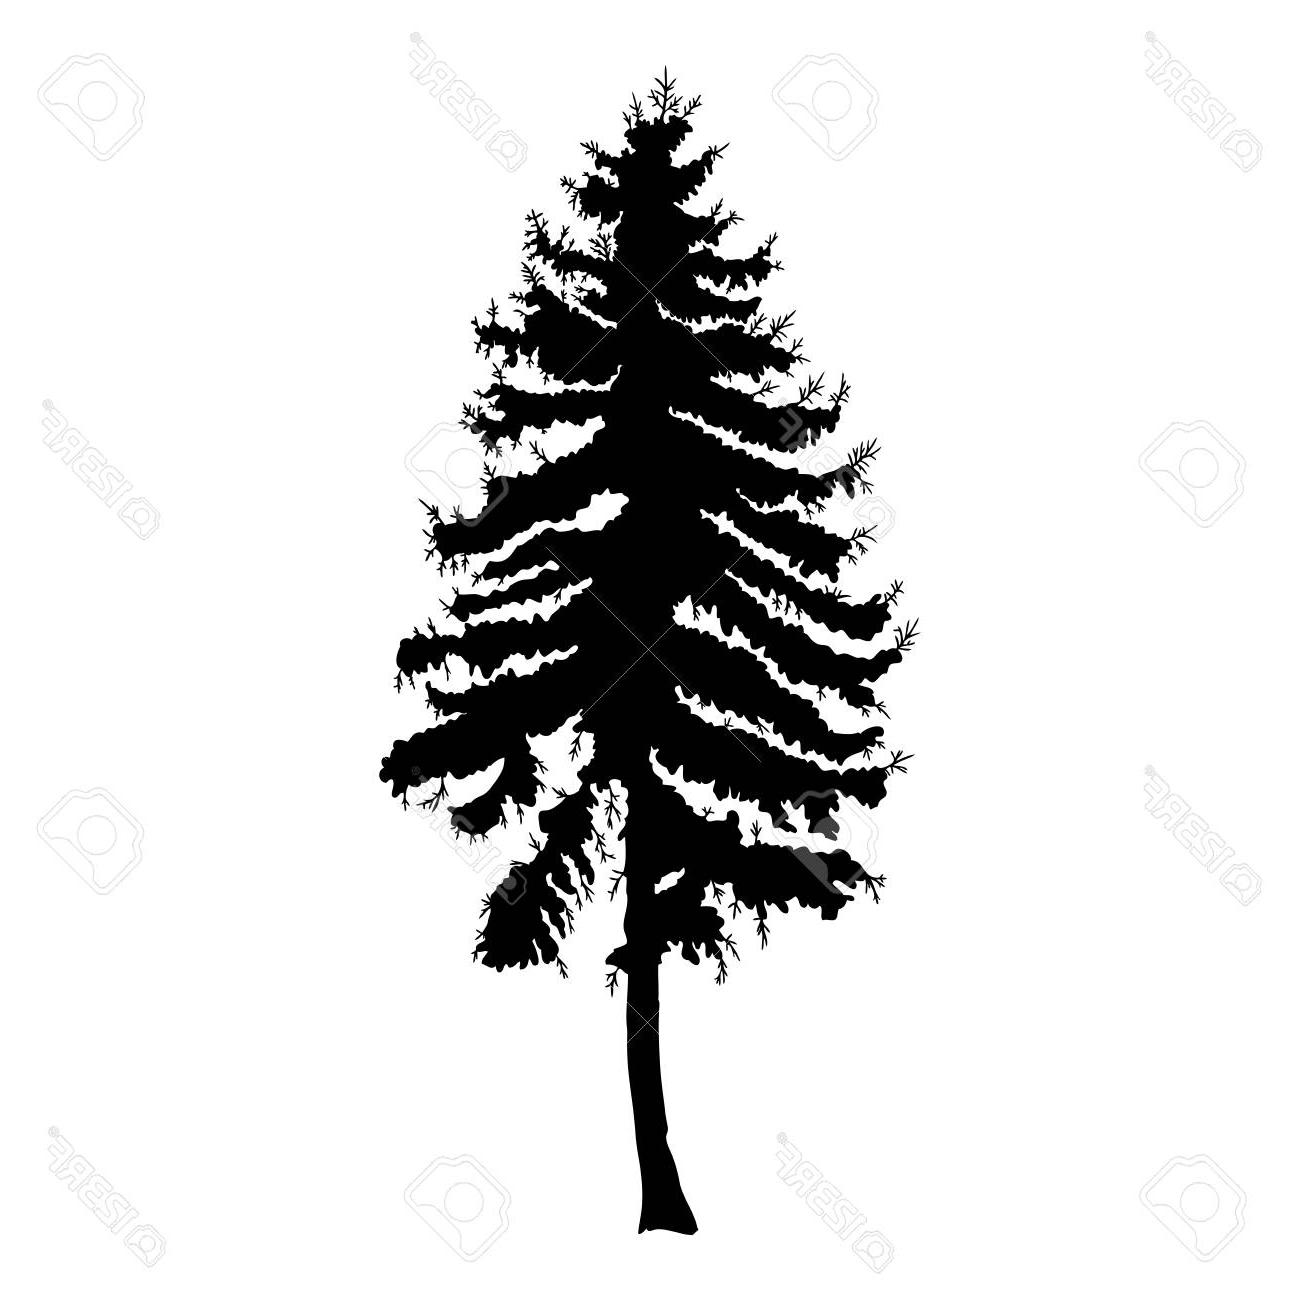 Spruce Tree Vector At Collection Of Spruce Tree Vector Free For Personal Use 